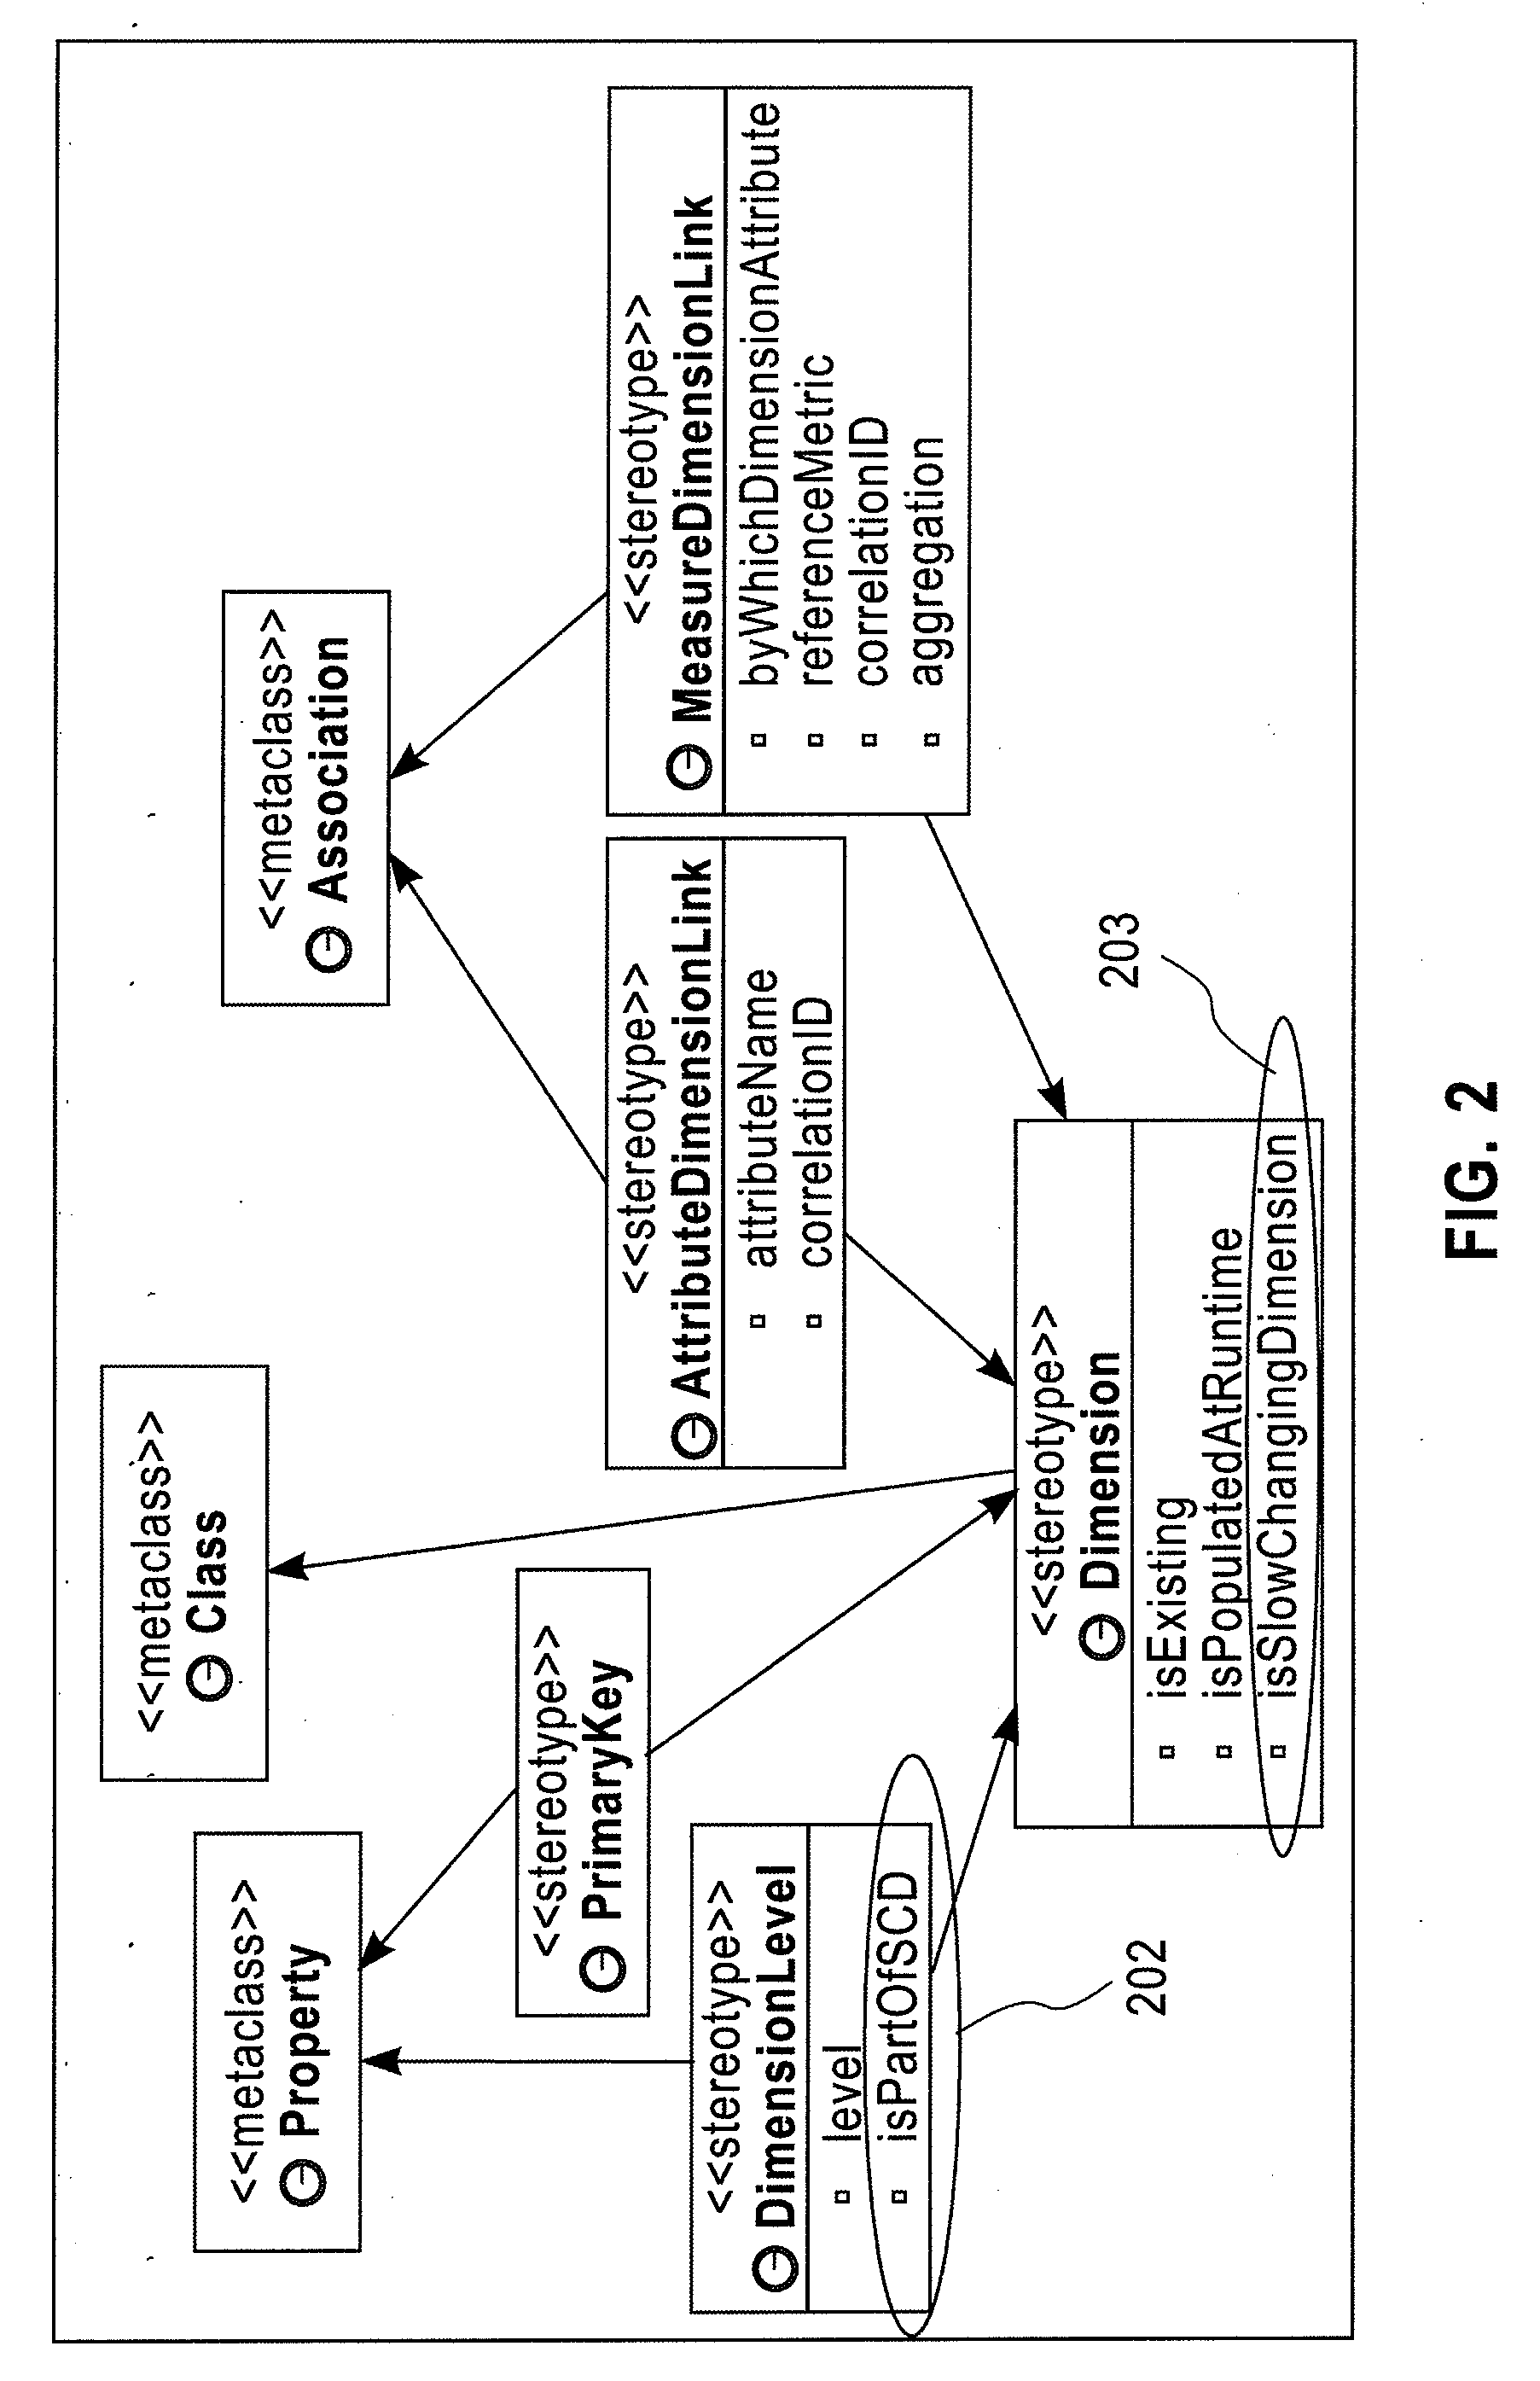 System and Method for Modeling Slow Changing Dimension and Auto Management Using Model Driven Business Performance Management